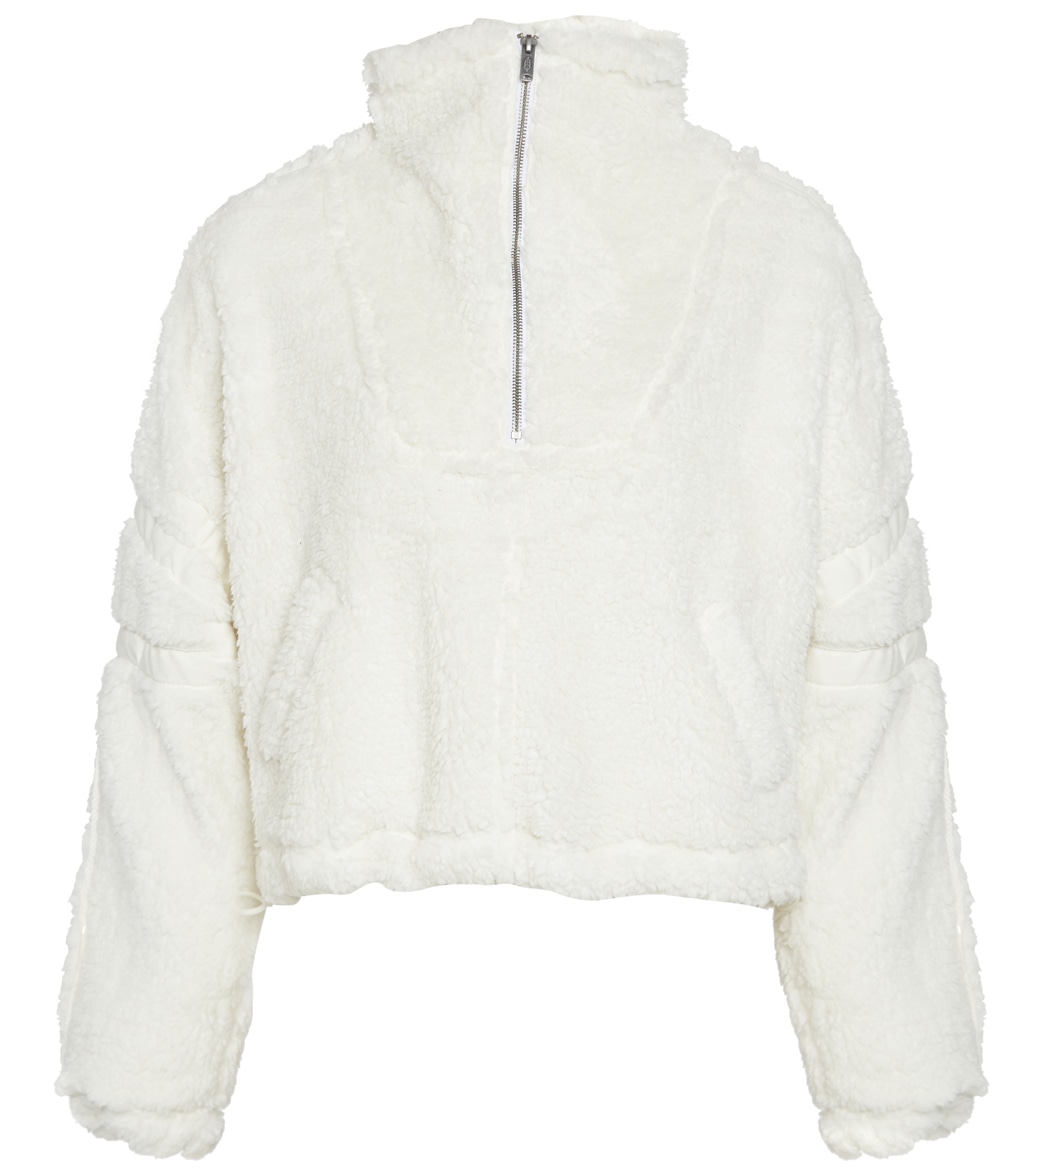 Free People Nantucket Fleece Pullover at SwimOutlet.com - Free Shipping